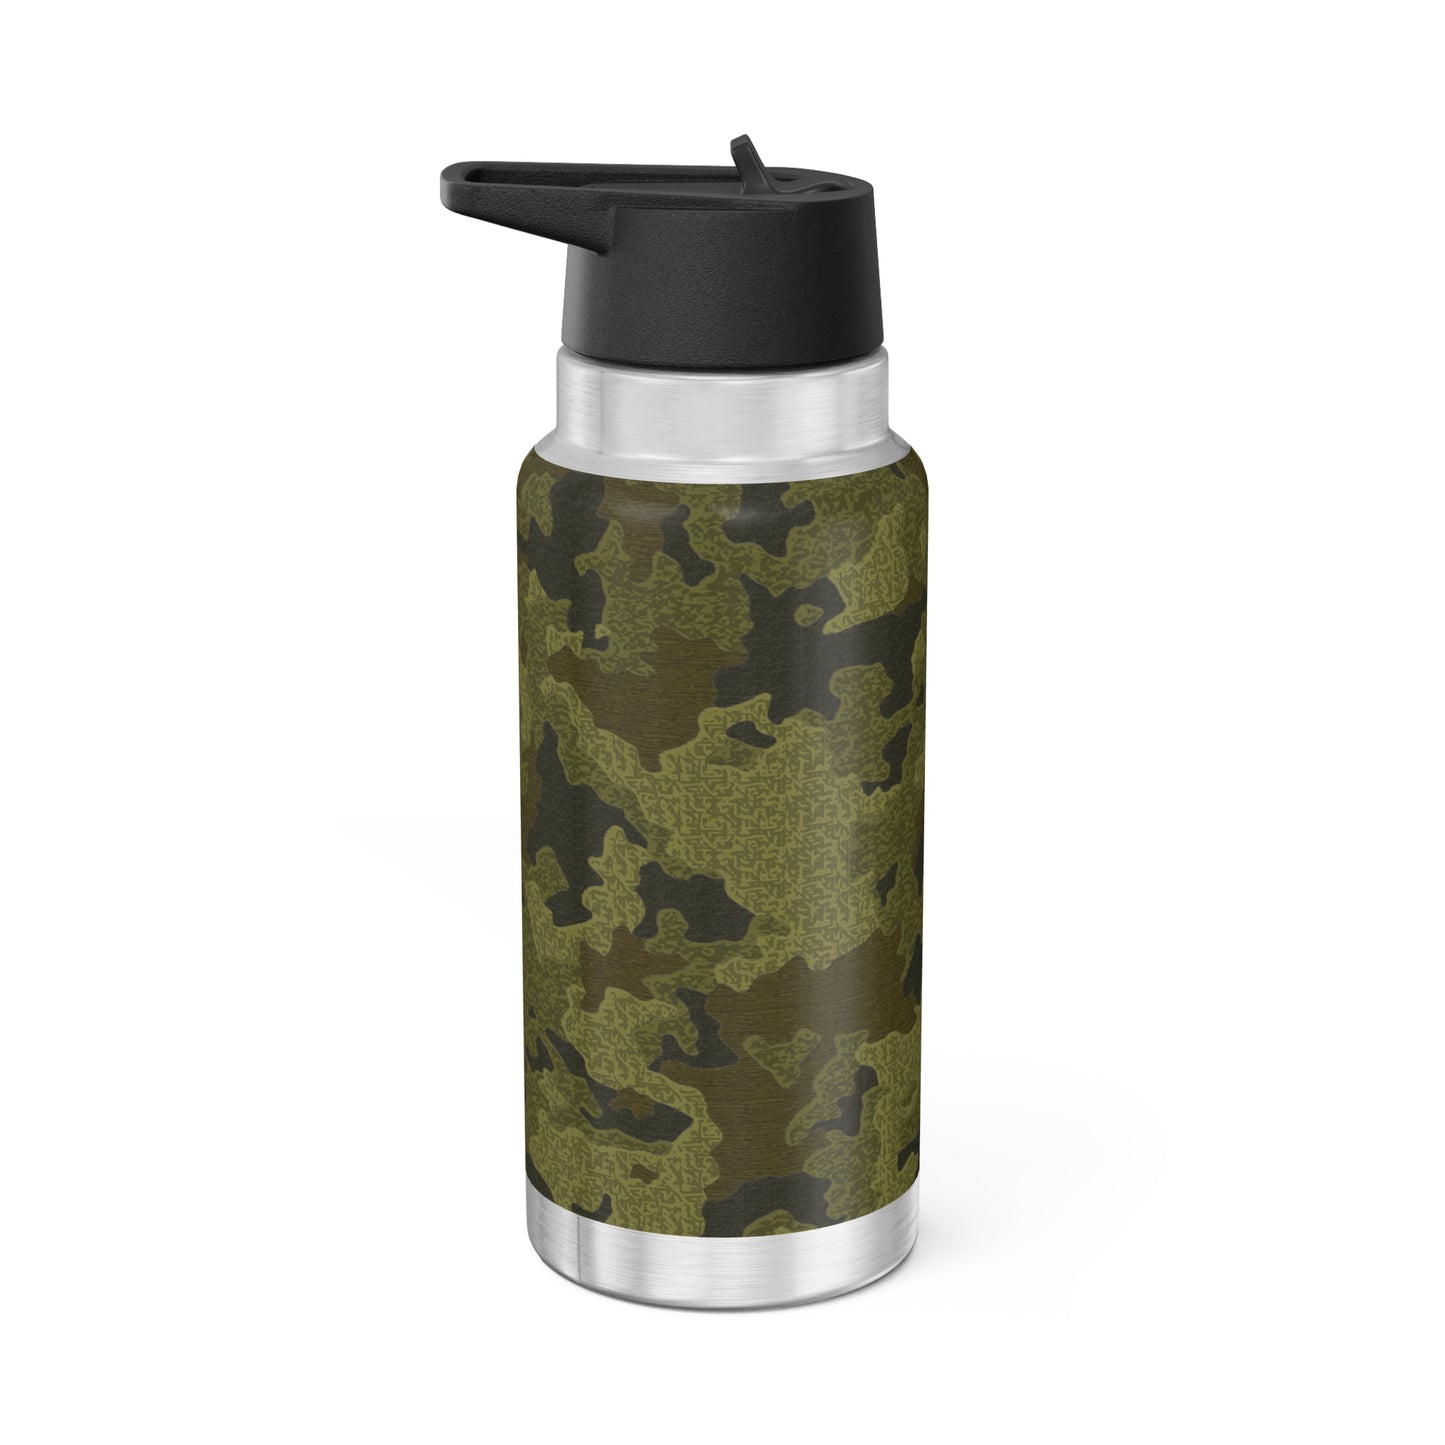 USARPAC, 5th Engineer Detachment, Geospatial Planning Cell Tiger Camo 32oz SteelGator